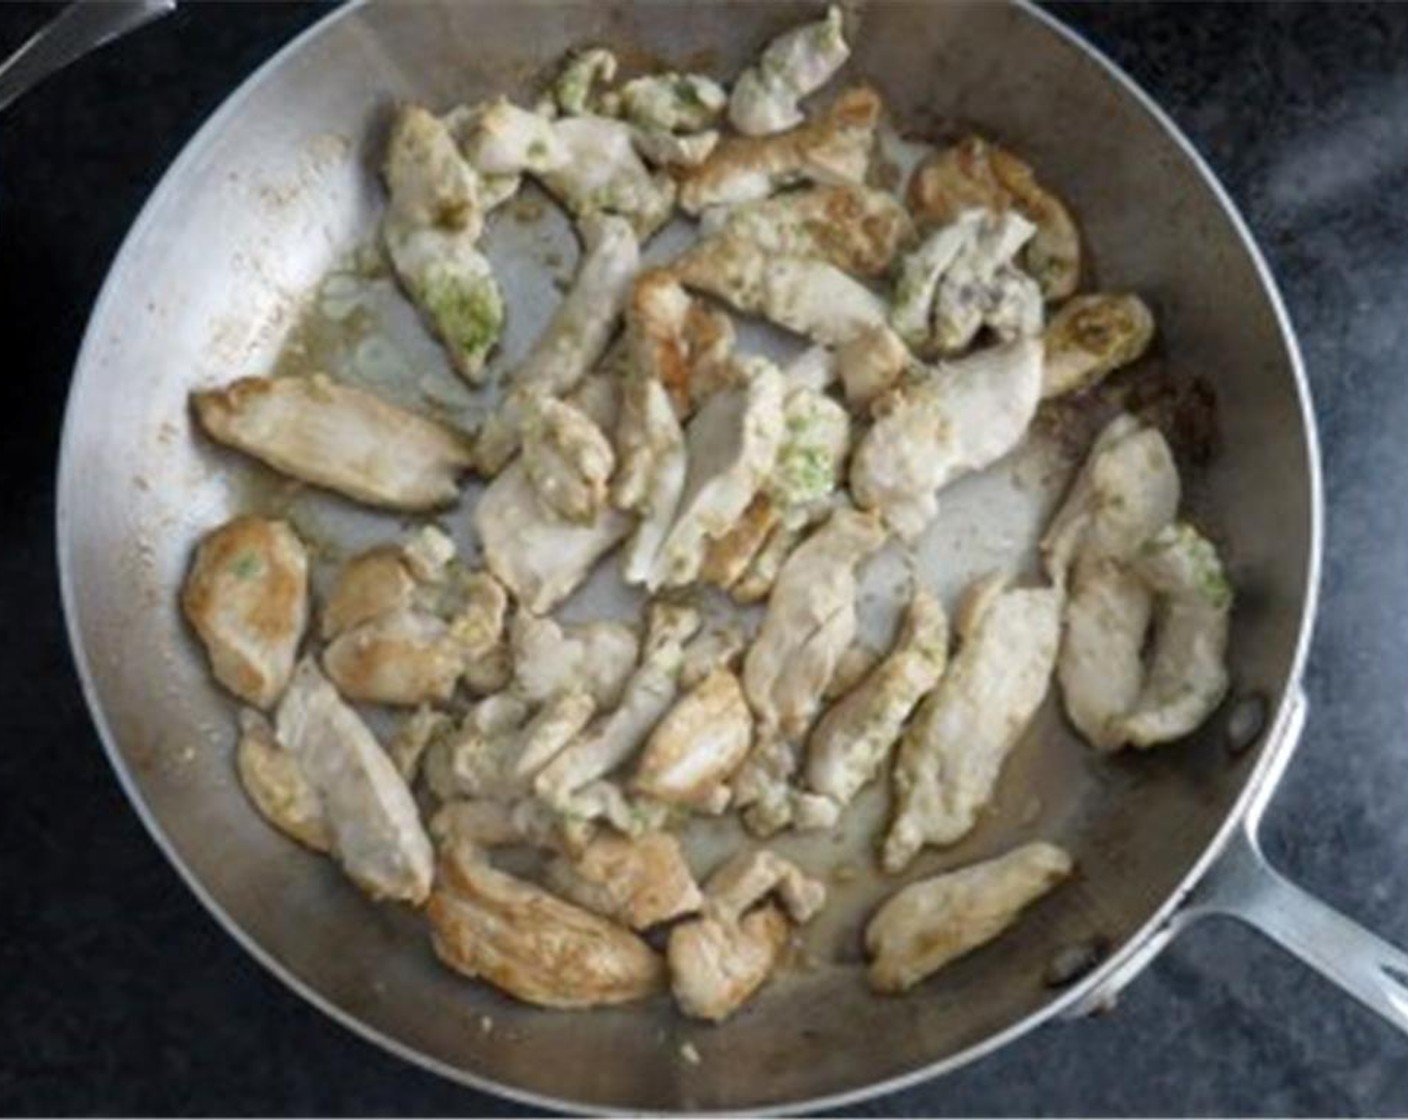 step 9 Add sliced chicken breast and let cook for 2 minutes, without stirring, until one side of the chicken releases from the pan. Flip chicken and brown 1-2 minutes.